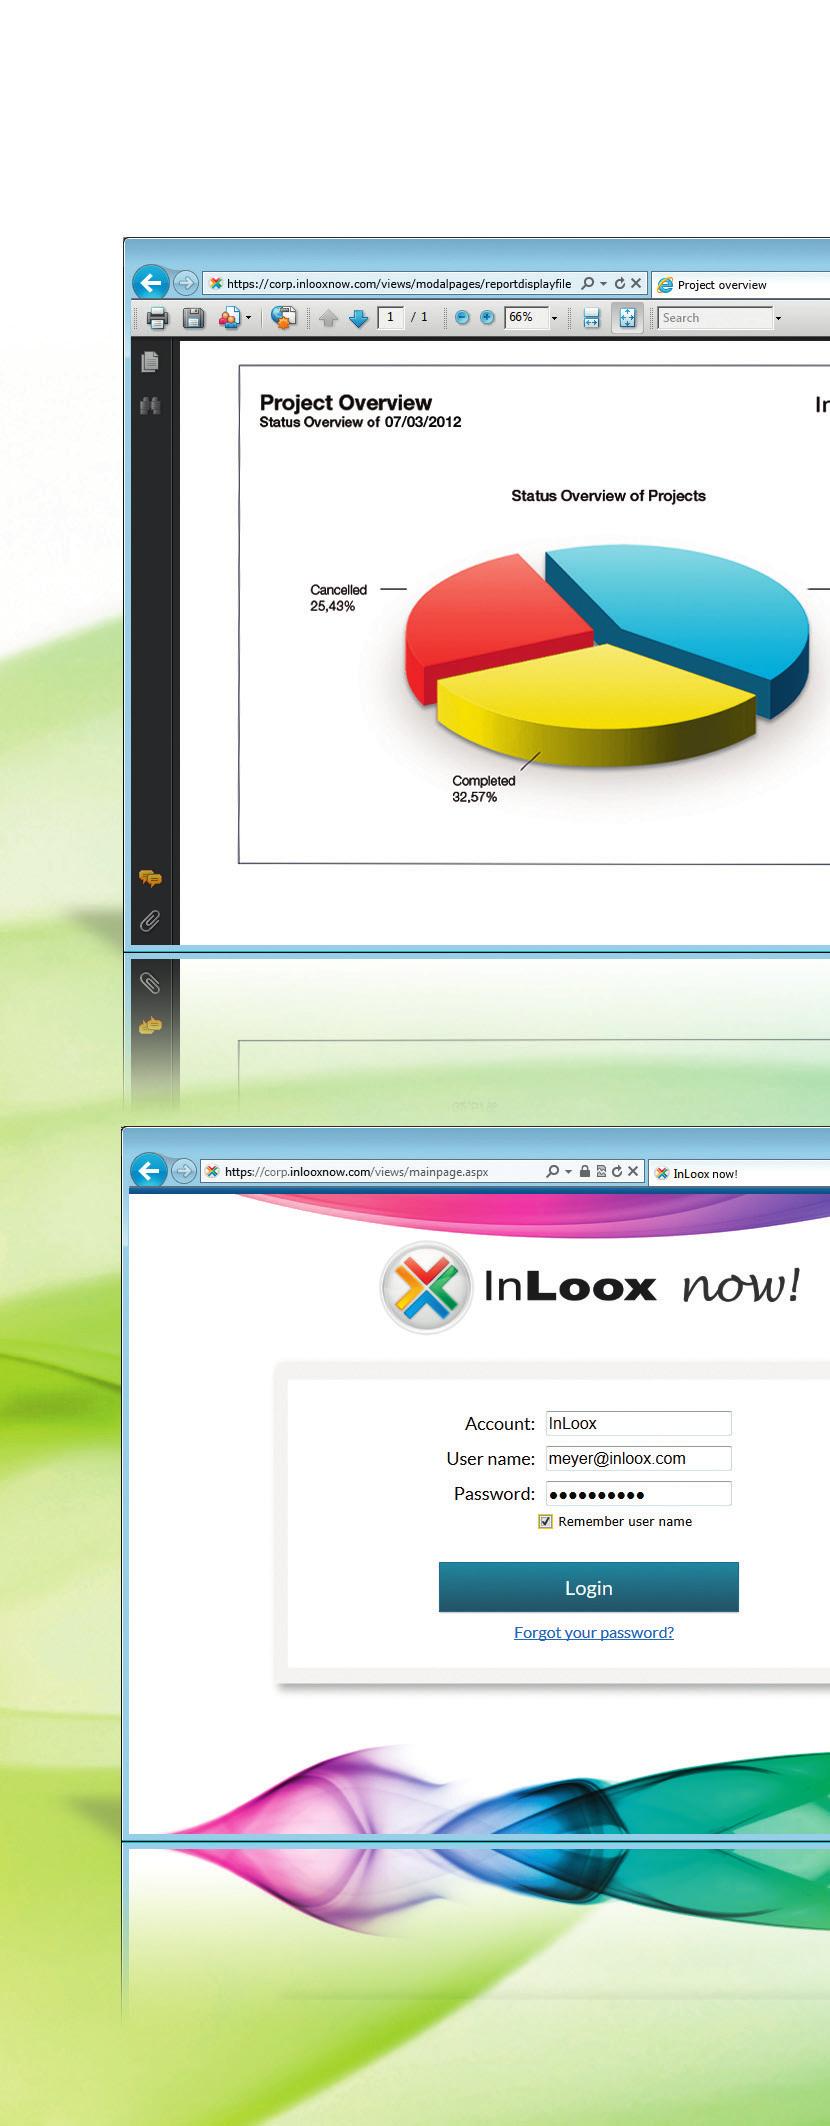 The Project Management Software integrated Innovative Features Easy to Use 6 System administrator: With InLoox PM, I have the choice I can deploy it as an on-premise installation or as online service